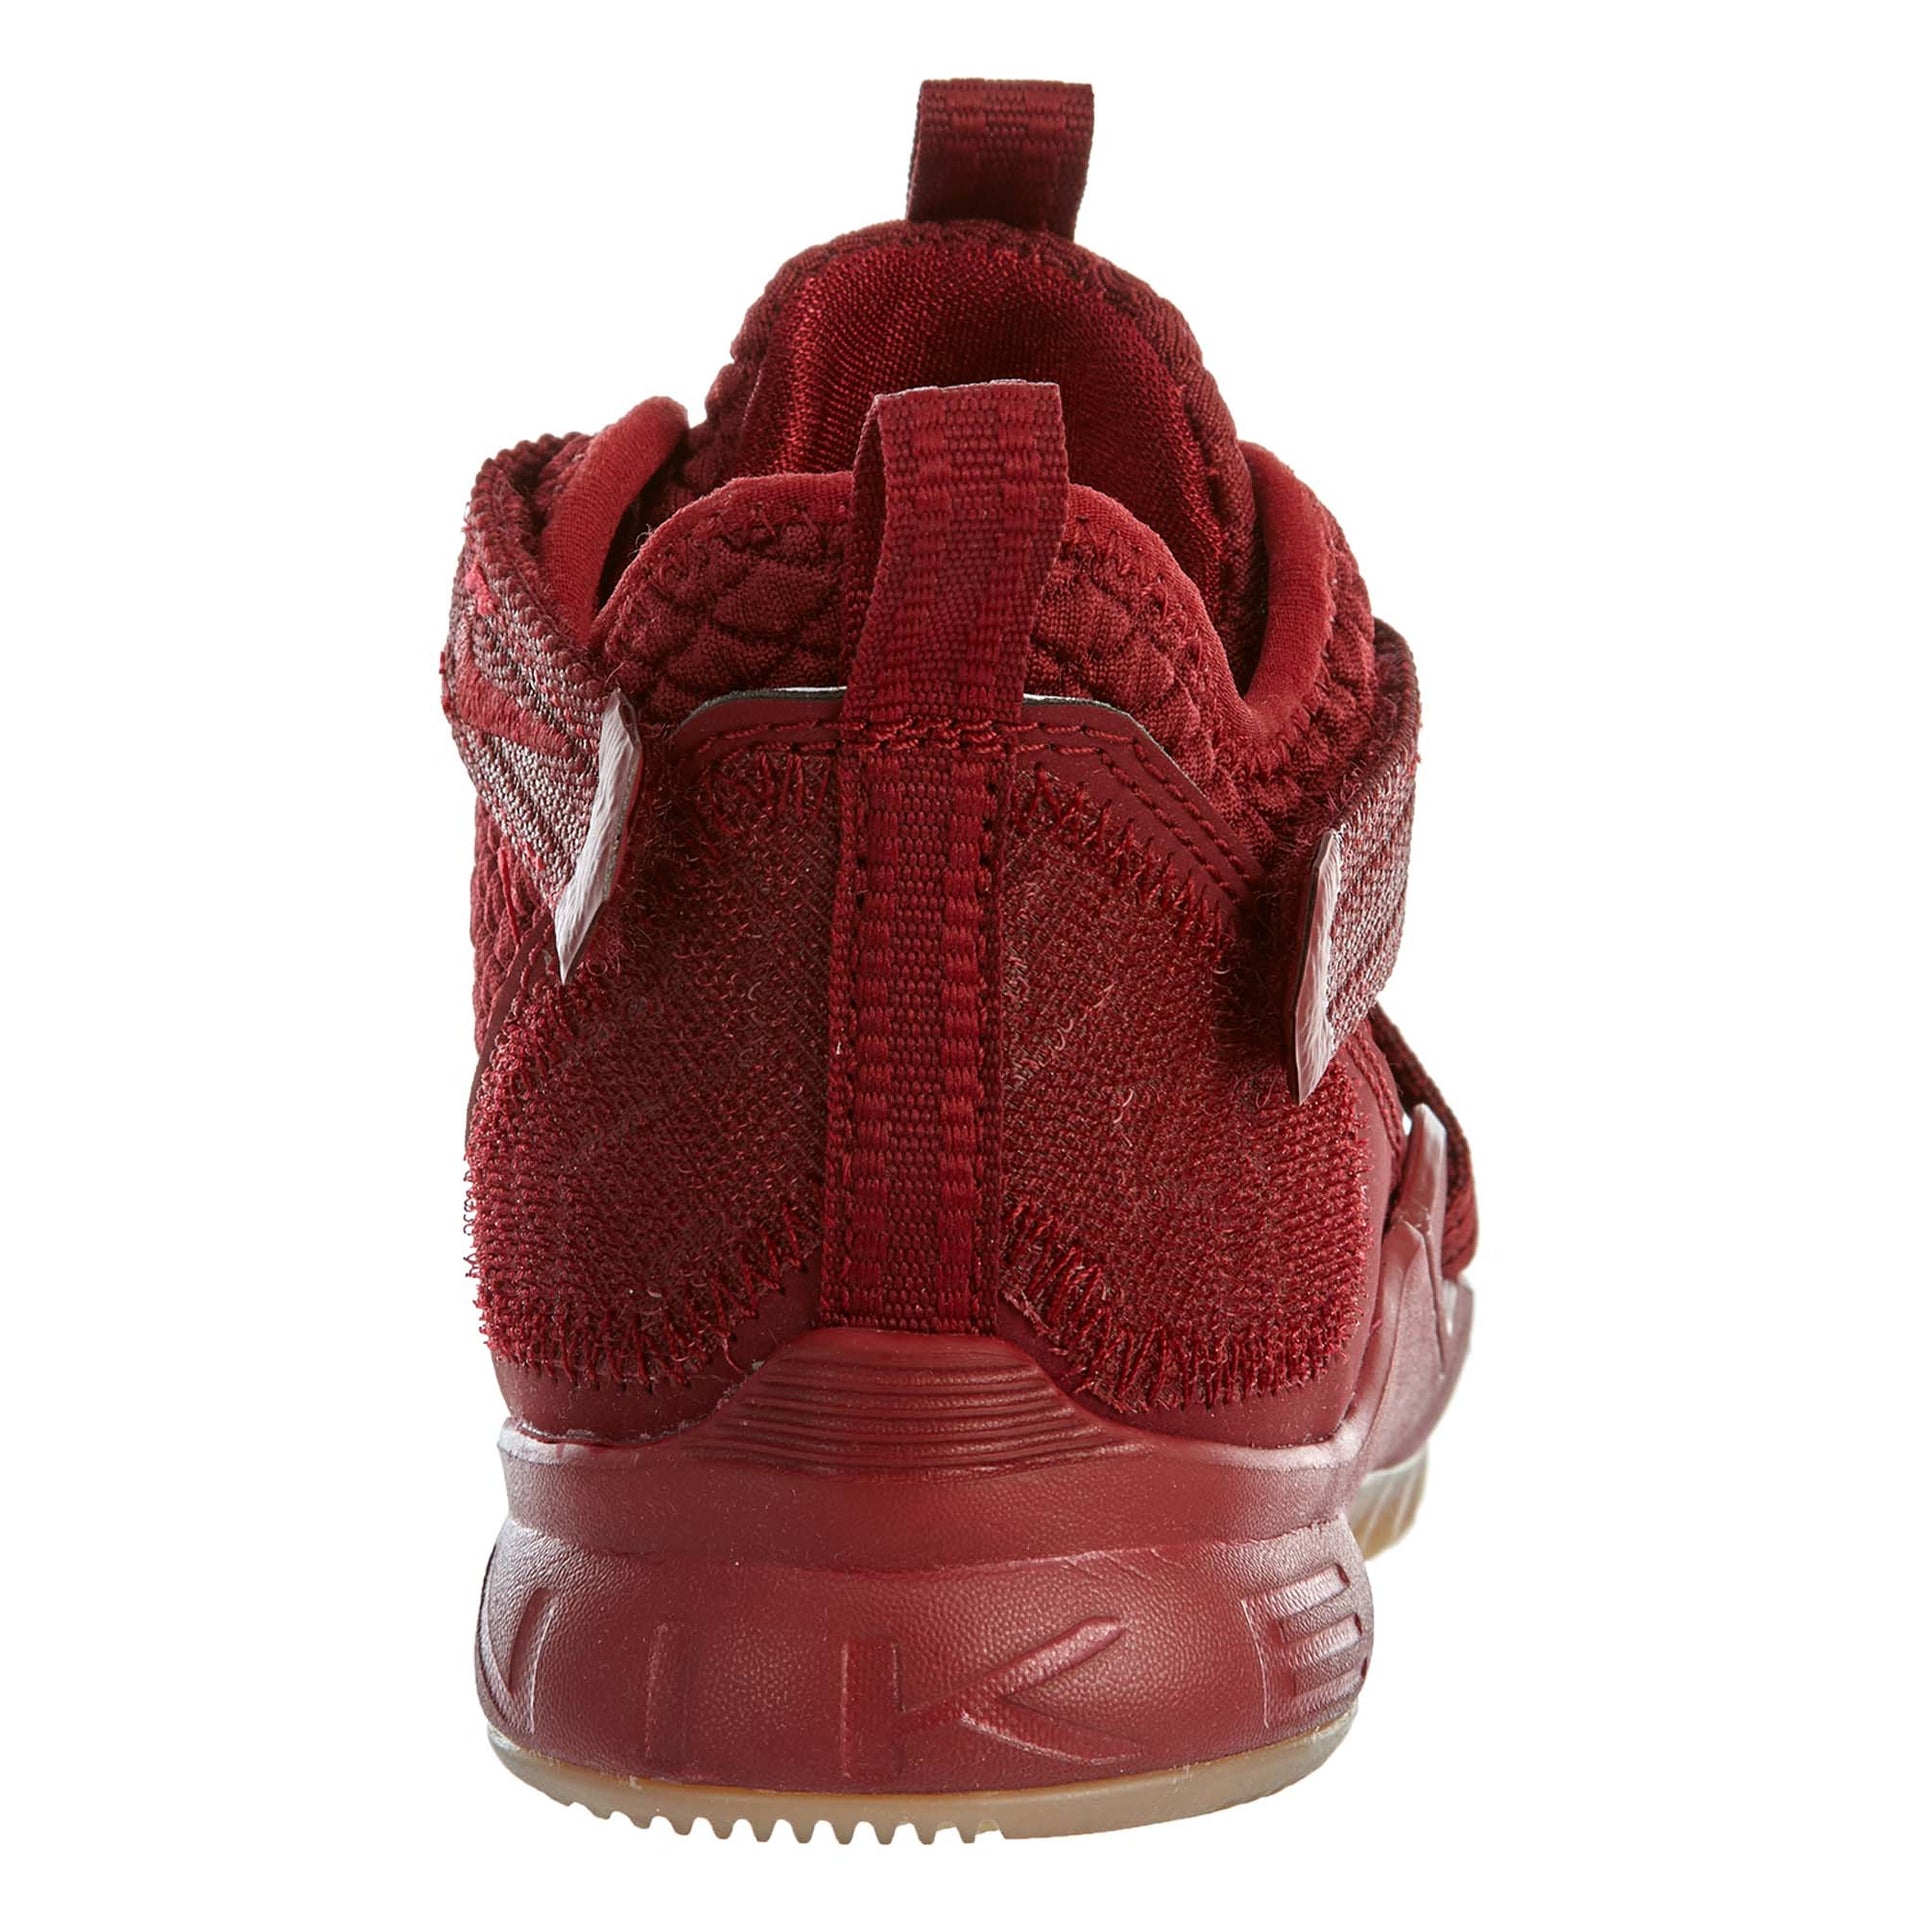 Nike Lebron Soldier 12 SFG Team Red Boys / Girls Style :AO2912